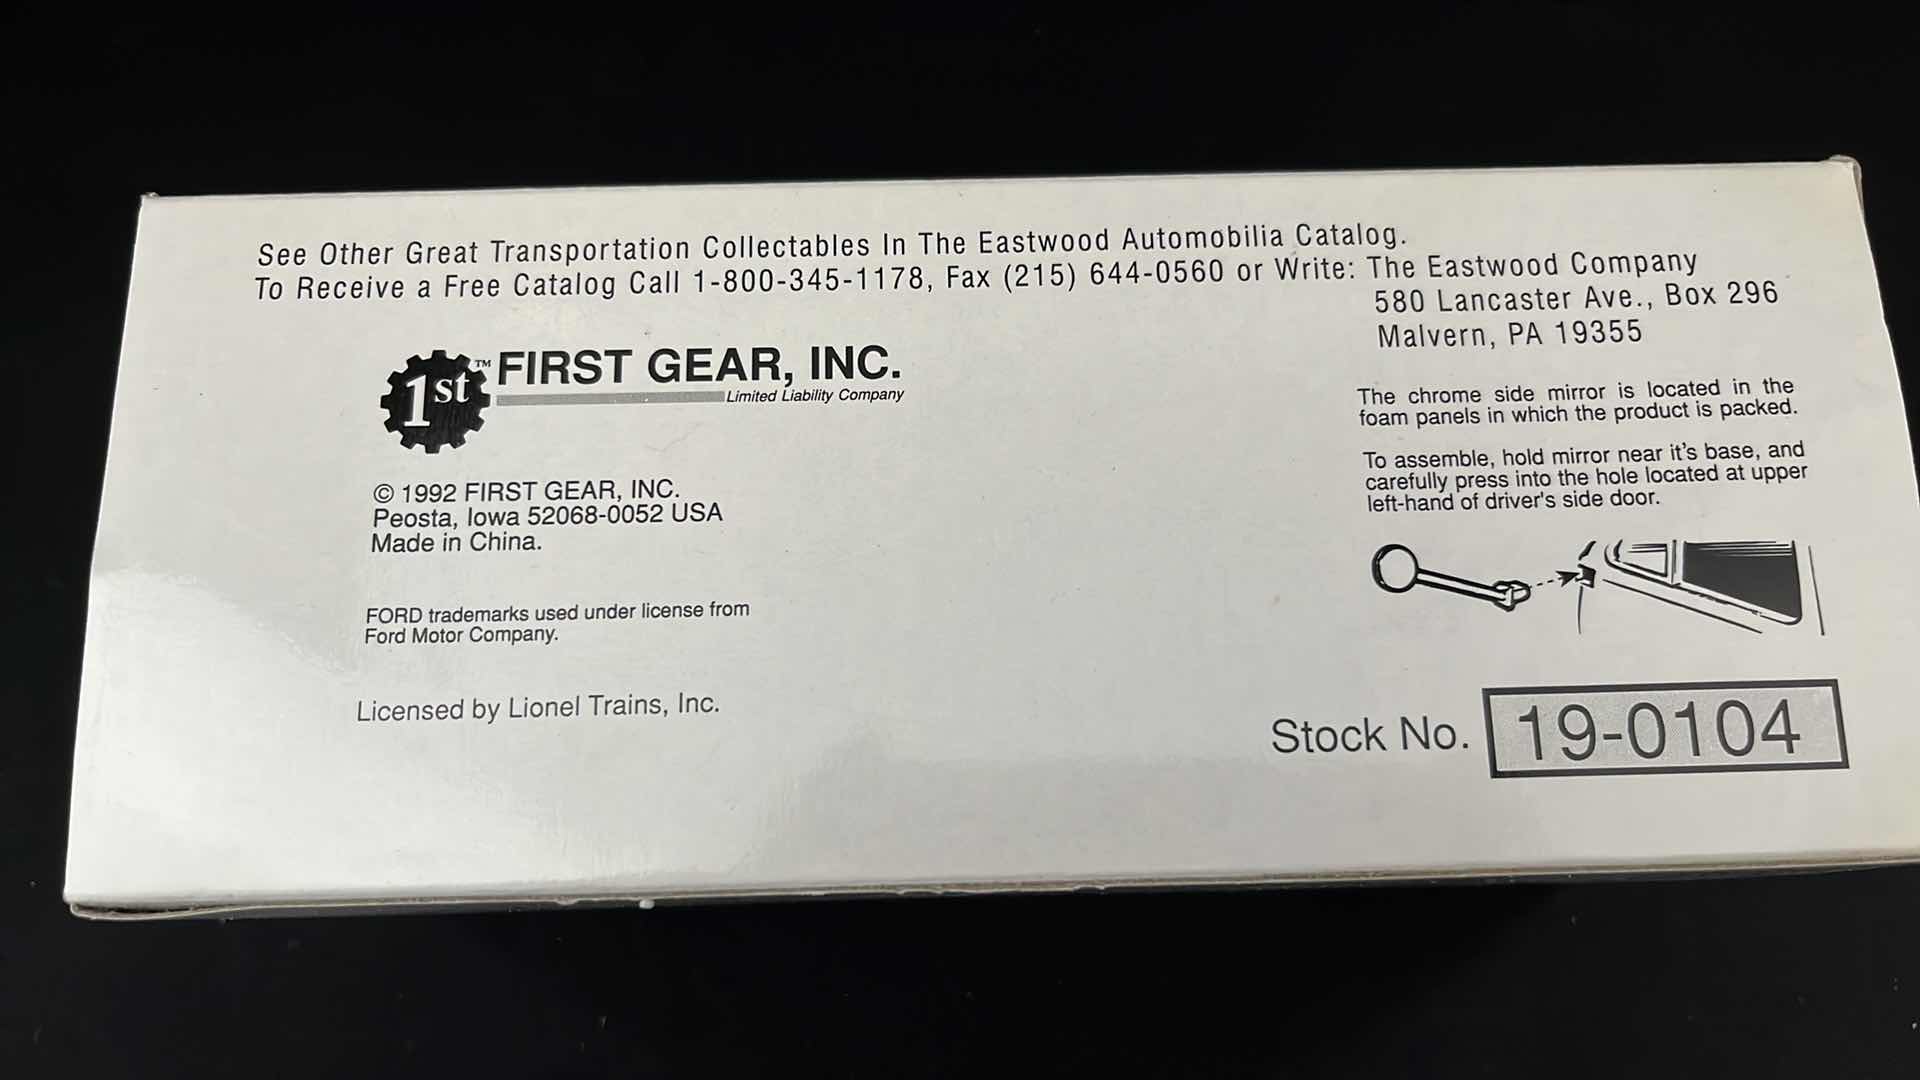 Photo 8 of FIRST GEAR INC, EASTWOOD AUTOMOBILIA TRANSPORTATION COLLECTIBLES LIONEL ELECTRIC TRAINS 1951 FORD F-6 STOCK NO 19-0104